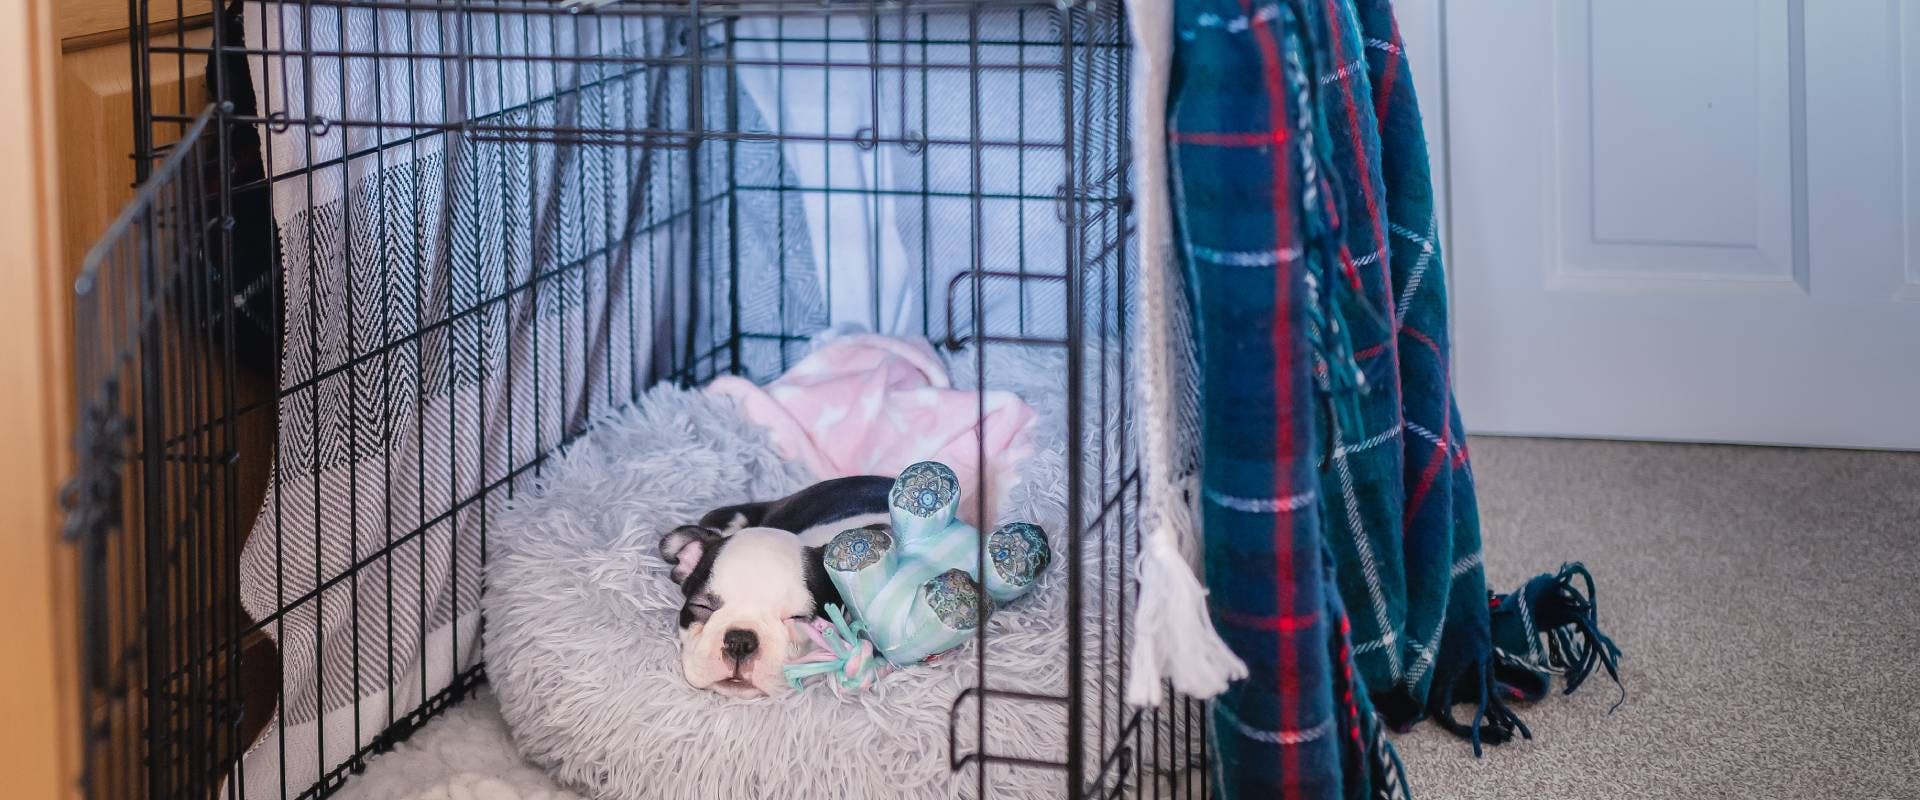 a young puppy sleeping in a comfy dog bed inside their crate next to a plush dog toy